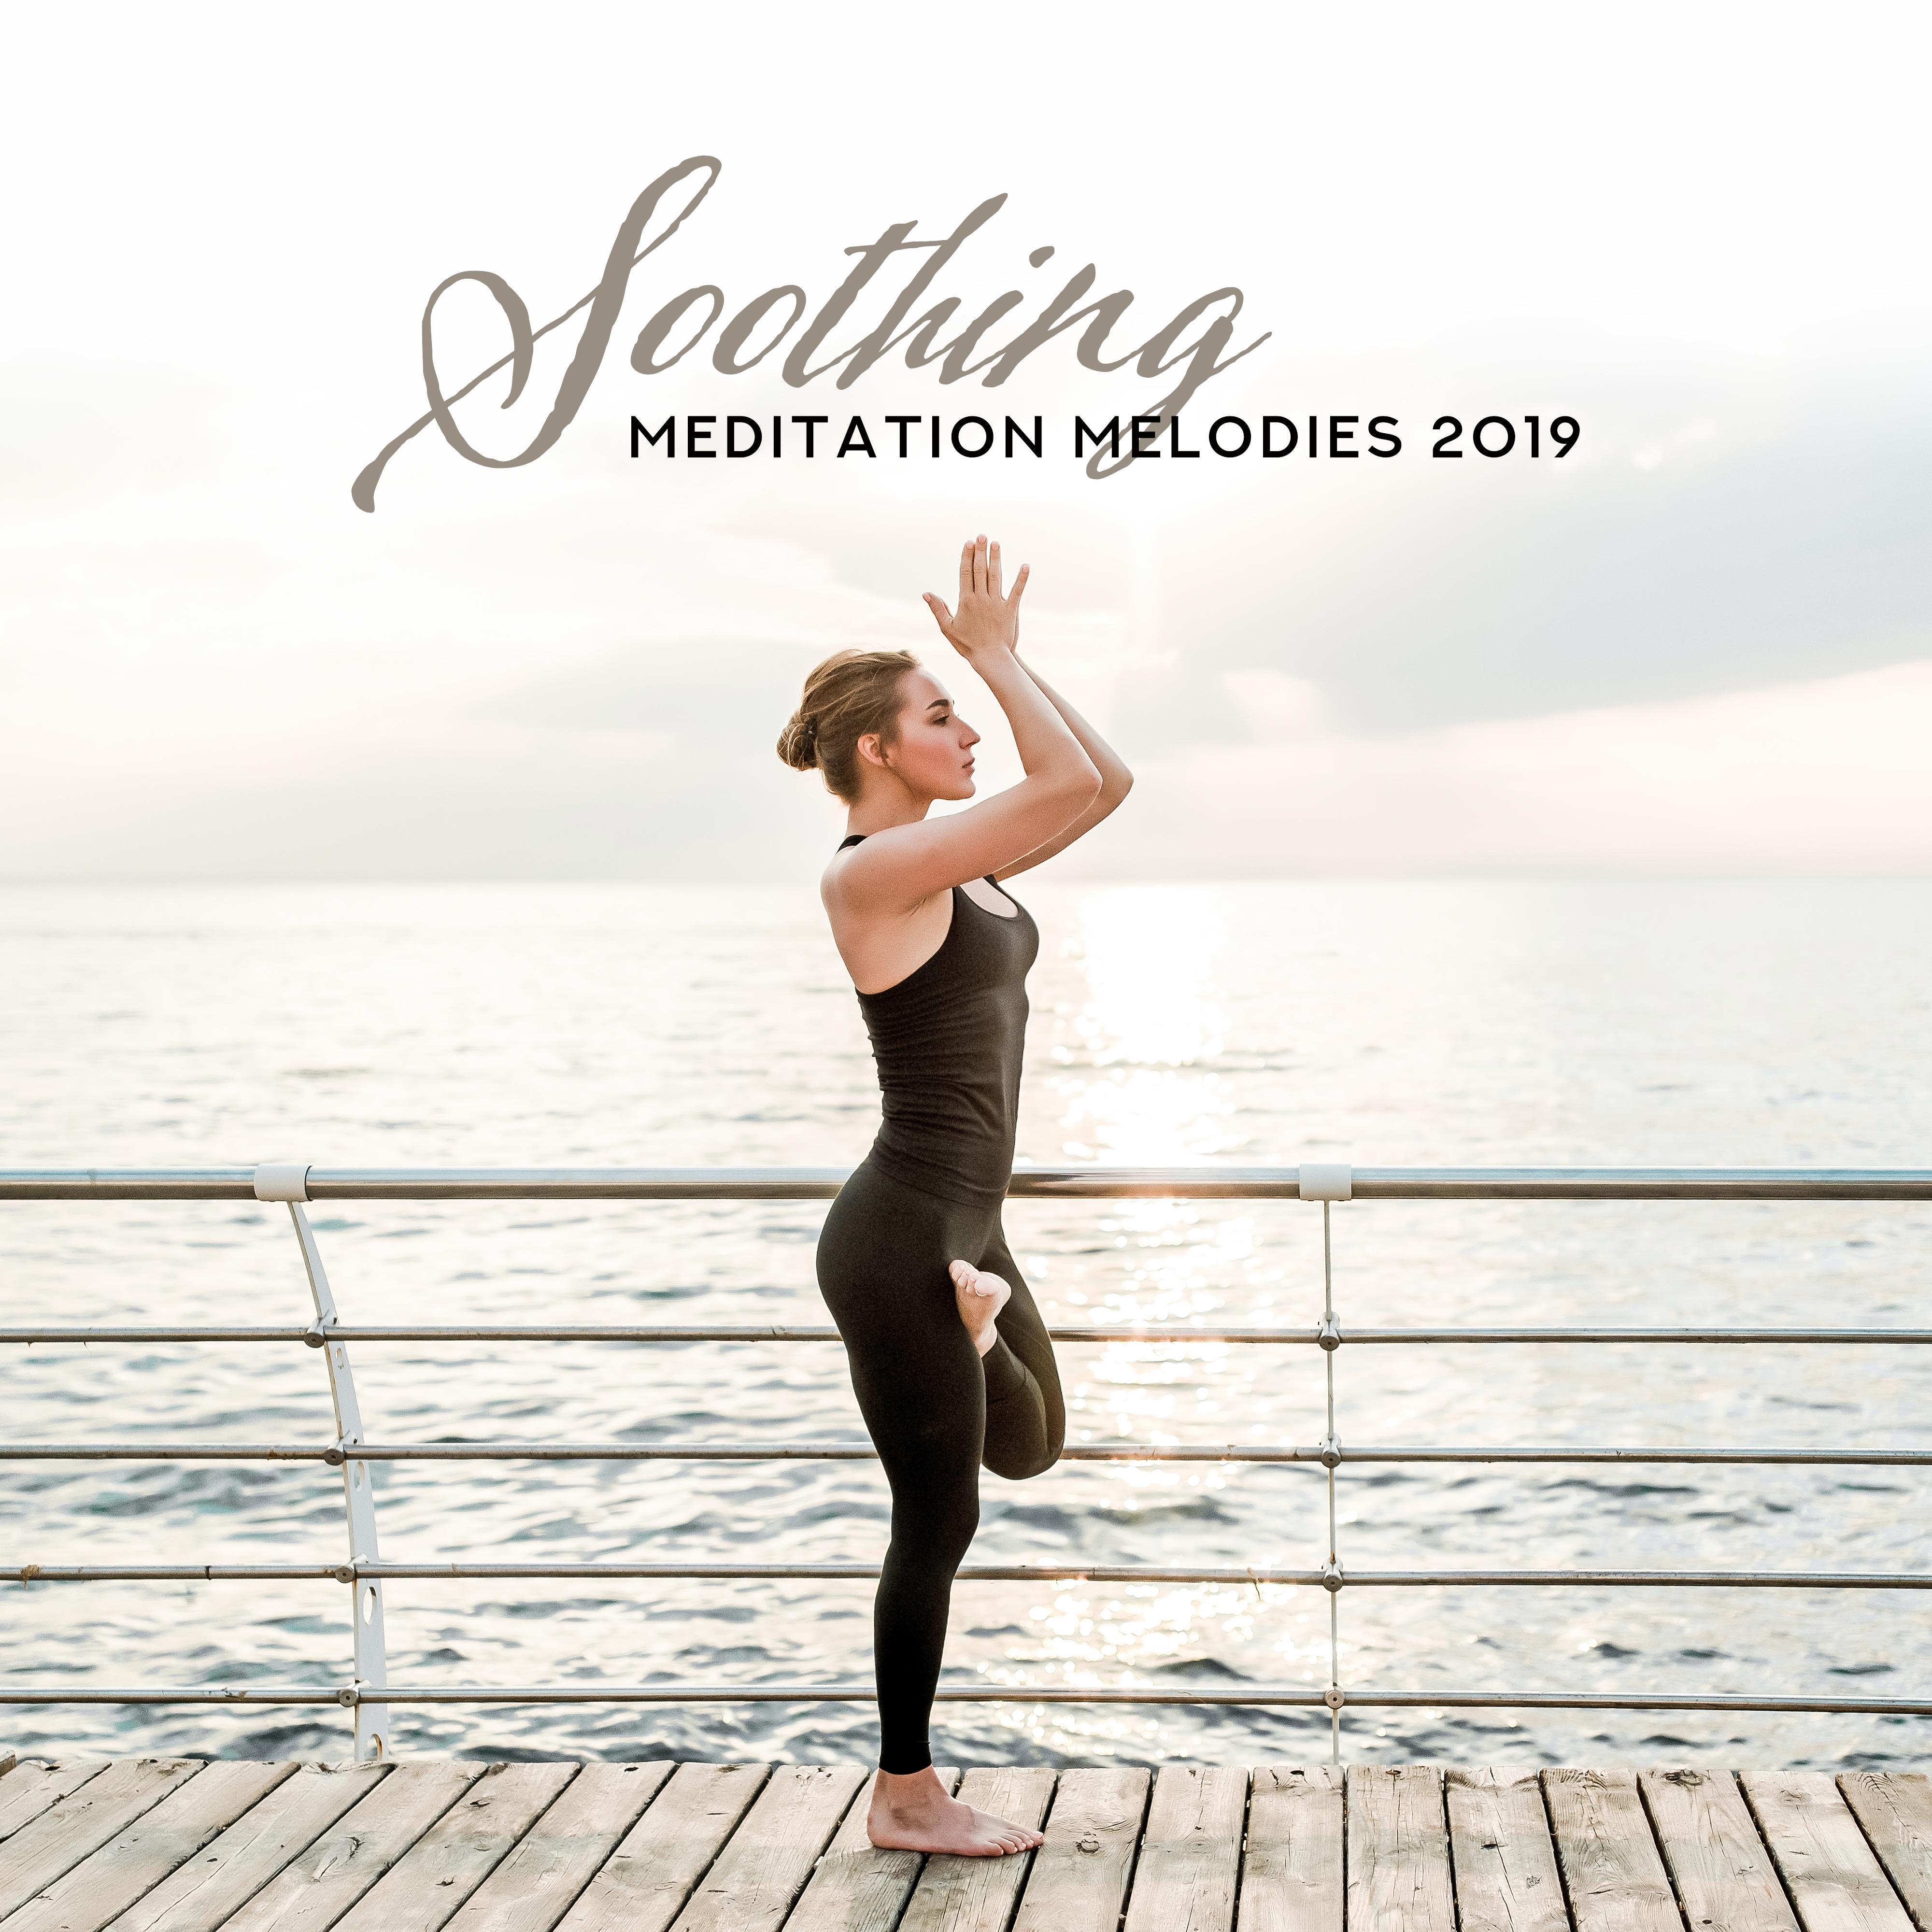 Soothing Meditation Melodies 2019  New Age Ambient  Nature Music Created for Deep Yoga Session  Relaxation Moments, Regain Inner Harmony  Balance, Heal Chakras, Zen, Mantra